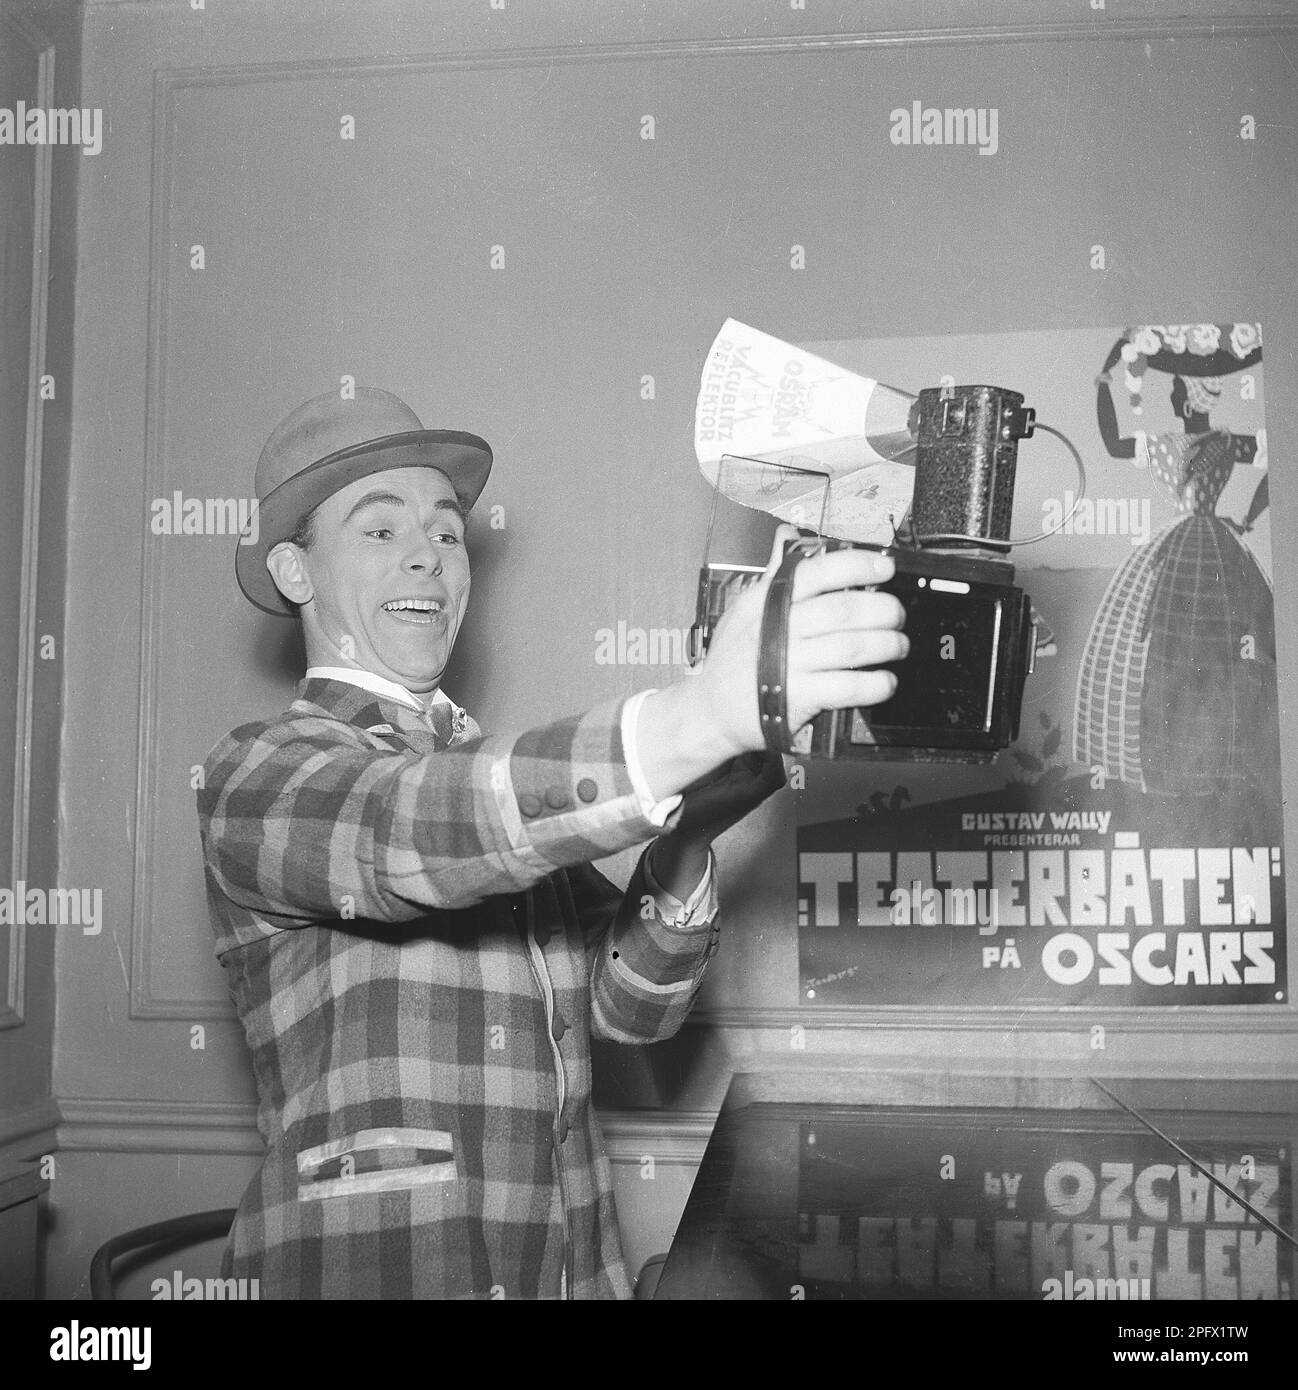 Nils Poppe, 1908-2000, Swedish actor. Here he immortalizes himself by holding a camera in his hand and pointing it at his happy face. A visual proof that the modern so-called selfie is nothing new. Sweden in 1943 Kristoffersson ref C27-4 Stock Photo